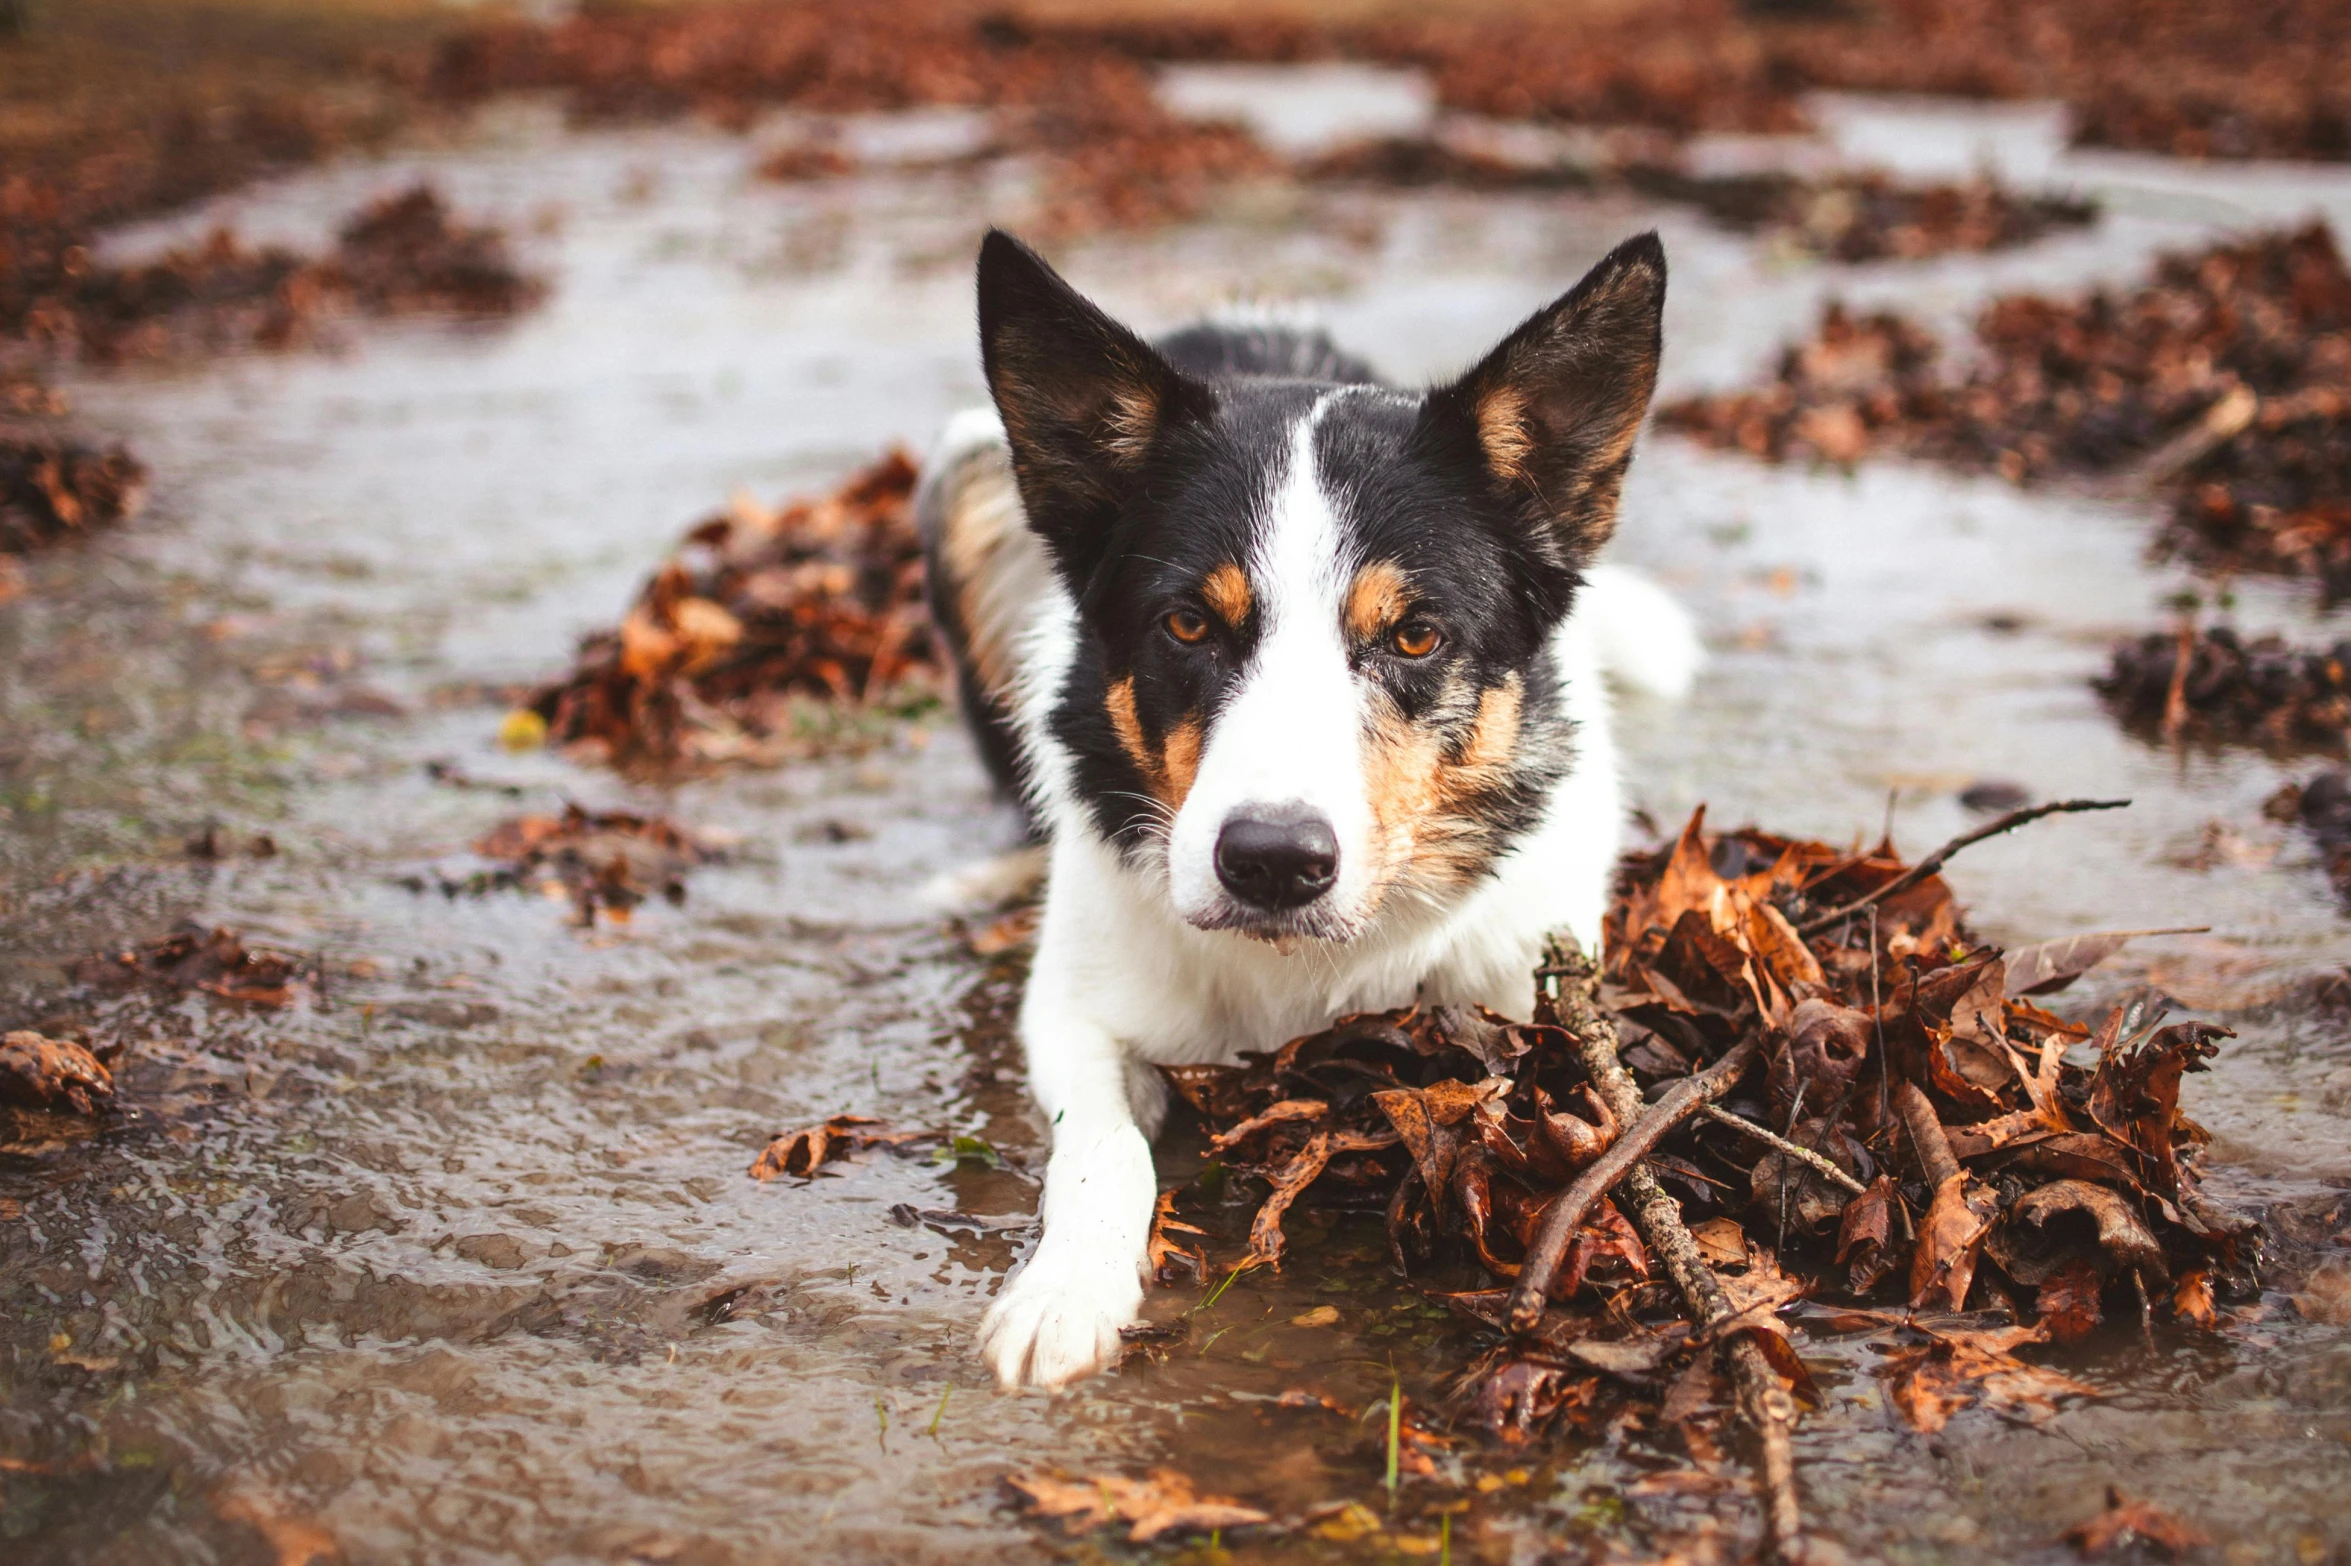 the black and white dog sits in the muddy wet area